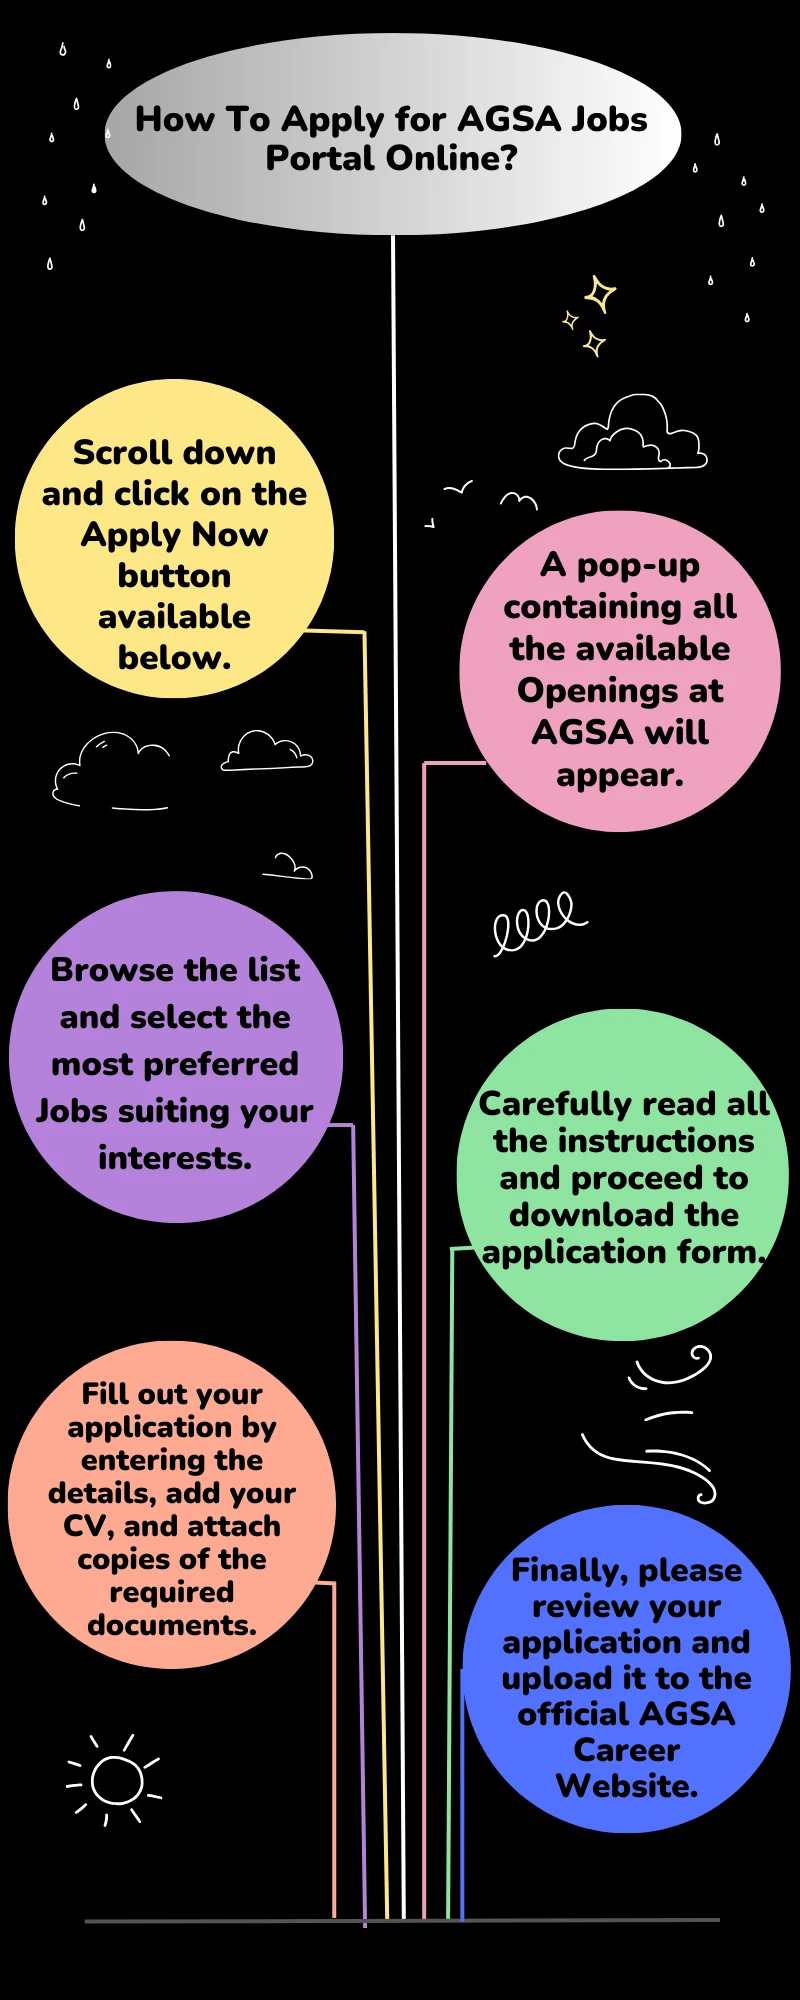 How To Apply for AGSA Jobs Portal Online?